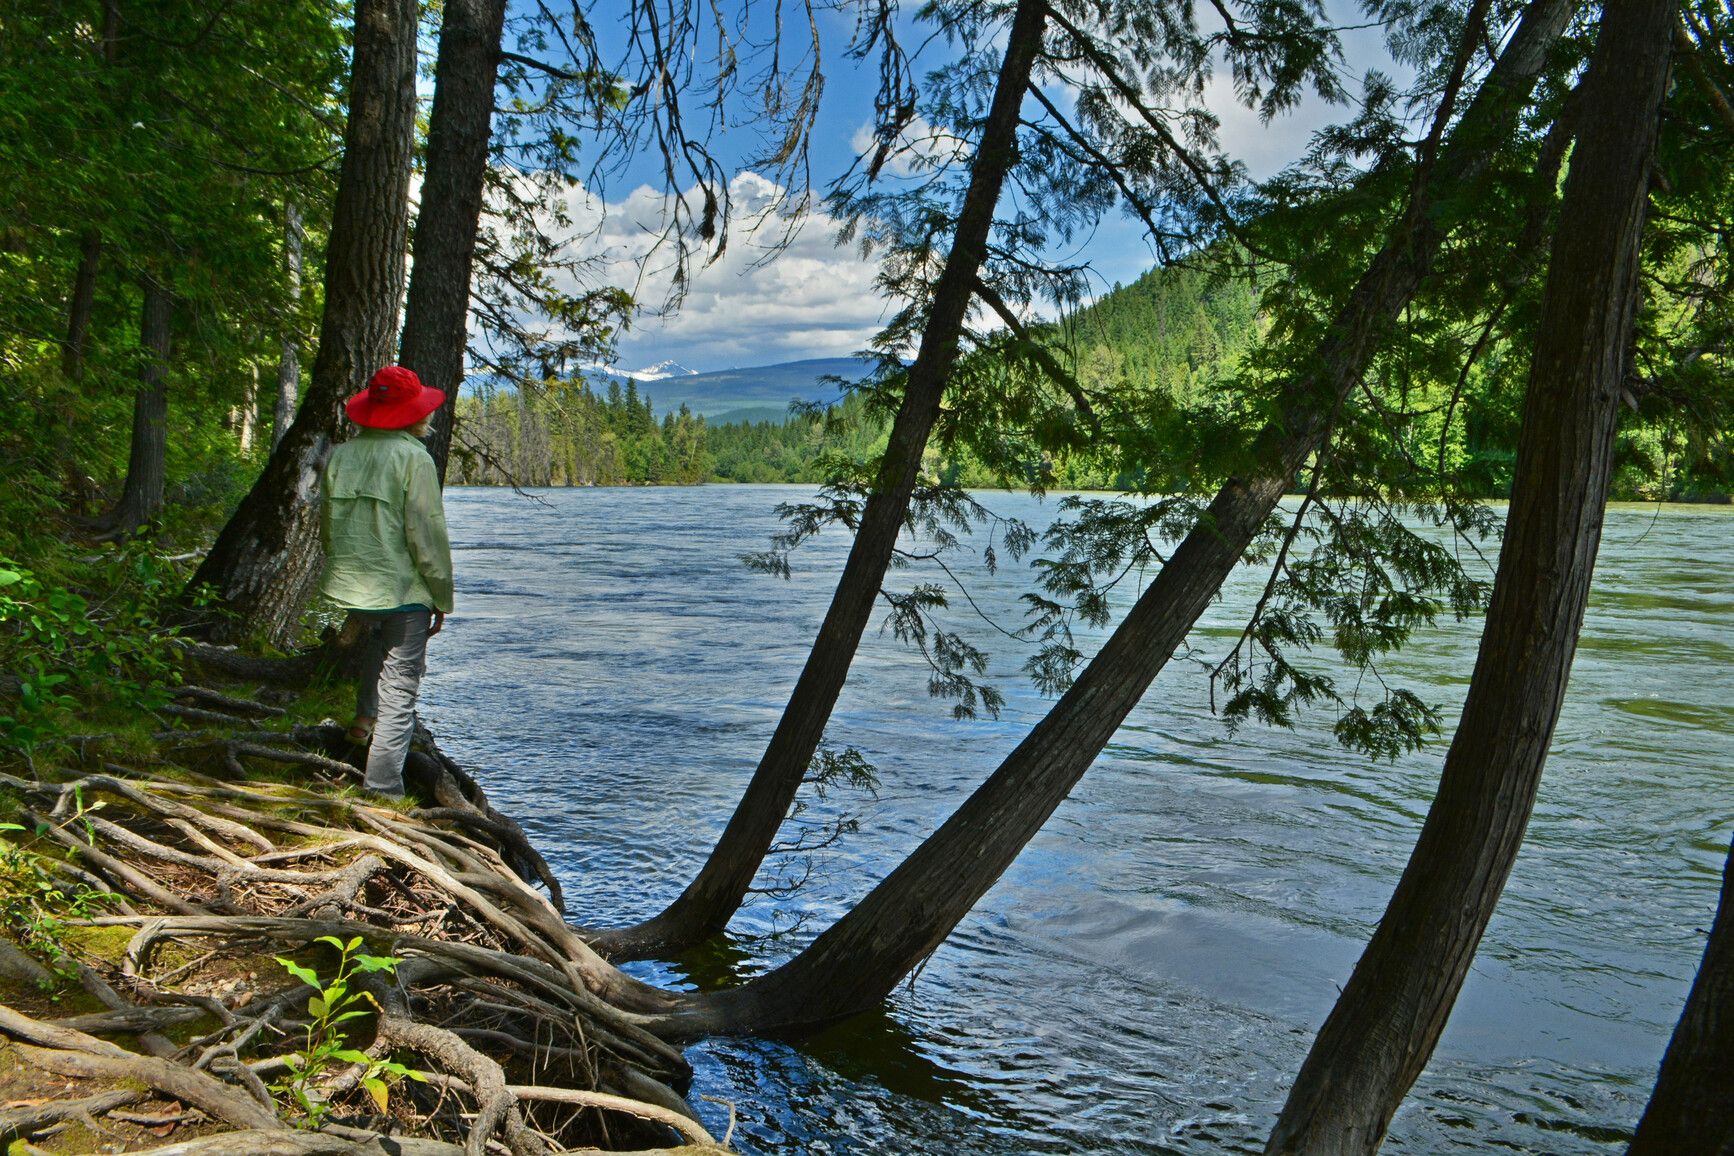 The fast-flowing waters of the North Thompson river in spring.